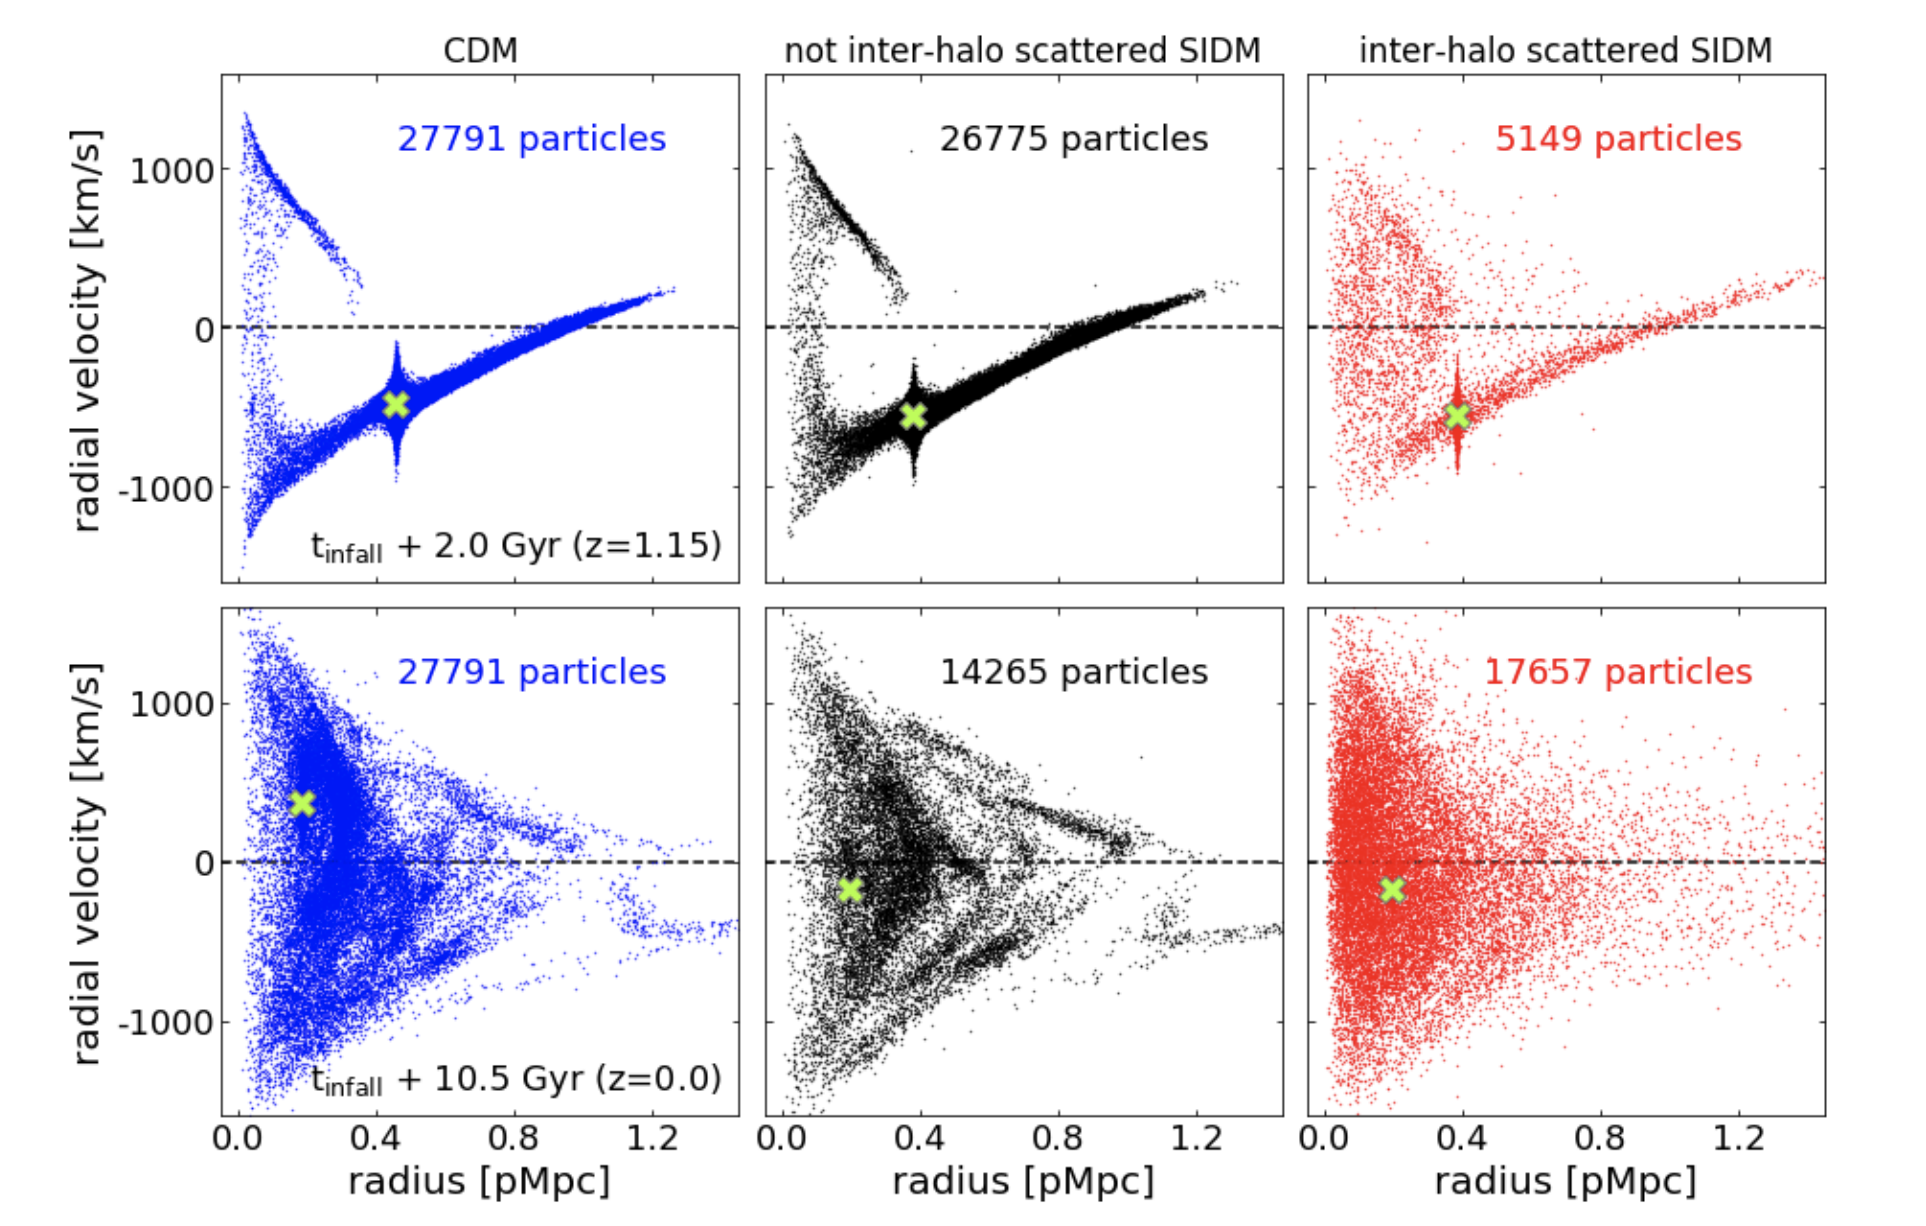 Two rows and three columns as described in the caption. In the top row, each figure shows a coherent structure with the dark matter particles following a line through the location of the galaxy, though the right-hand one is the fuzziest. In the bottom row, each of the figures shows a triangular shape with dark matter particles scattered approximately equally between radial velocities of +1000 and -1000 km/s.